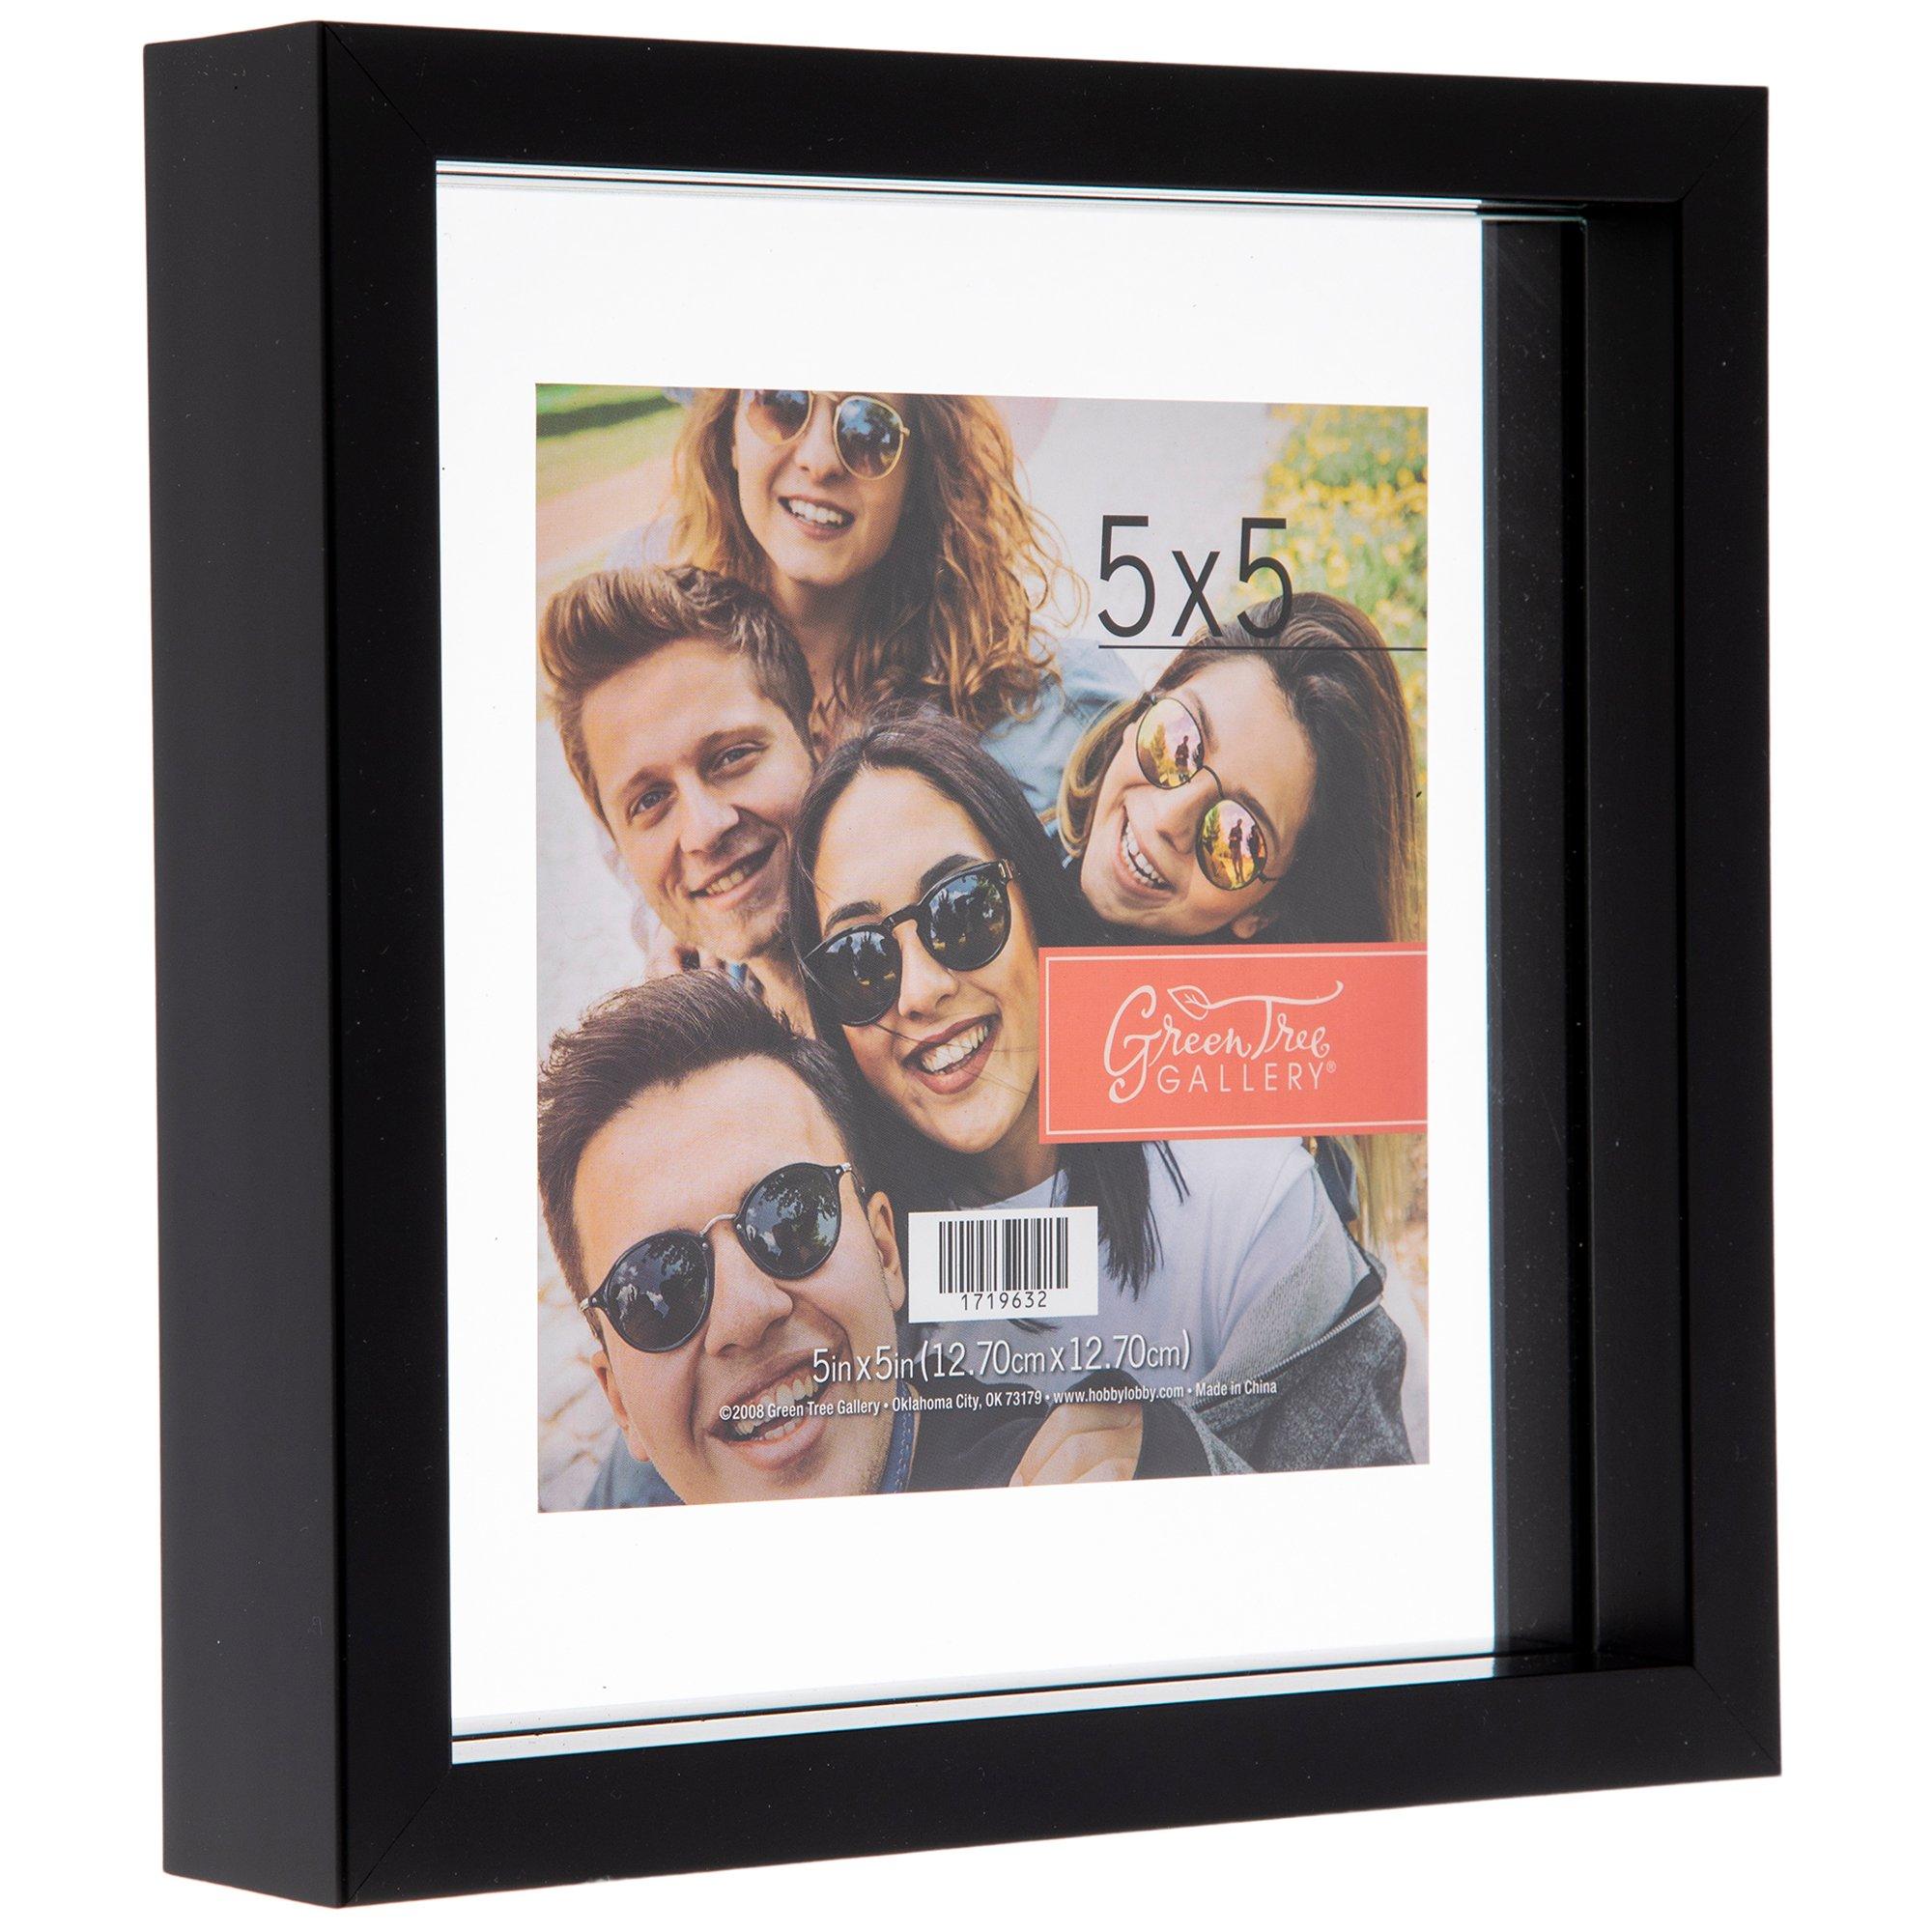 Pixy Canvas 8x10 Floater Frame for 15 Deep Canvas Paintings, Wood Panels Stretched Canvas Boards 4 Colors Available (Antique Sil